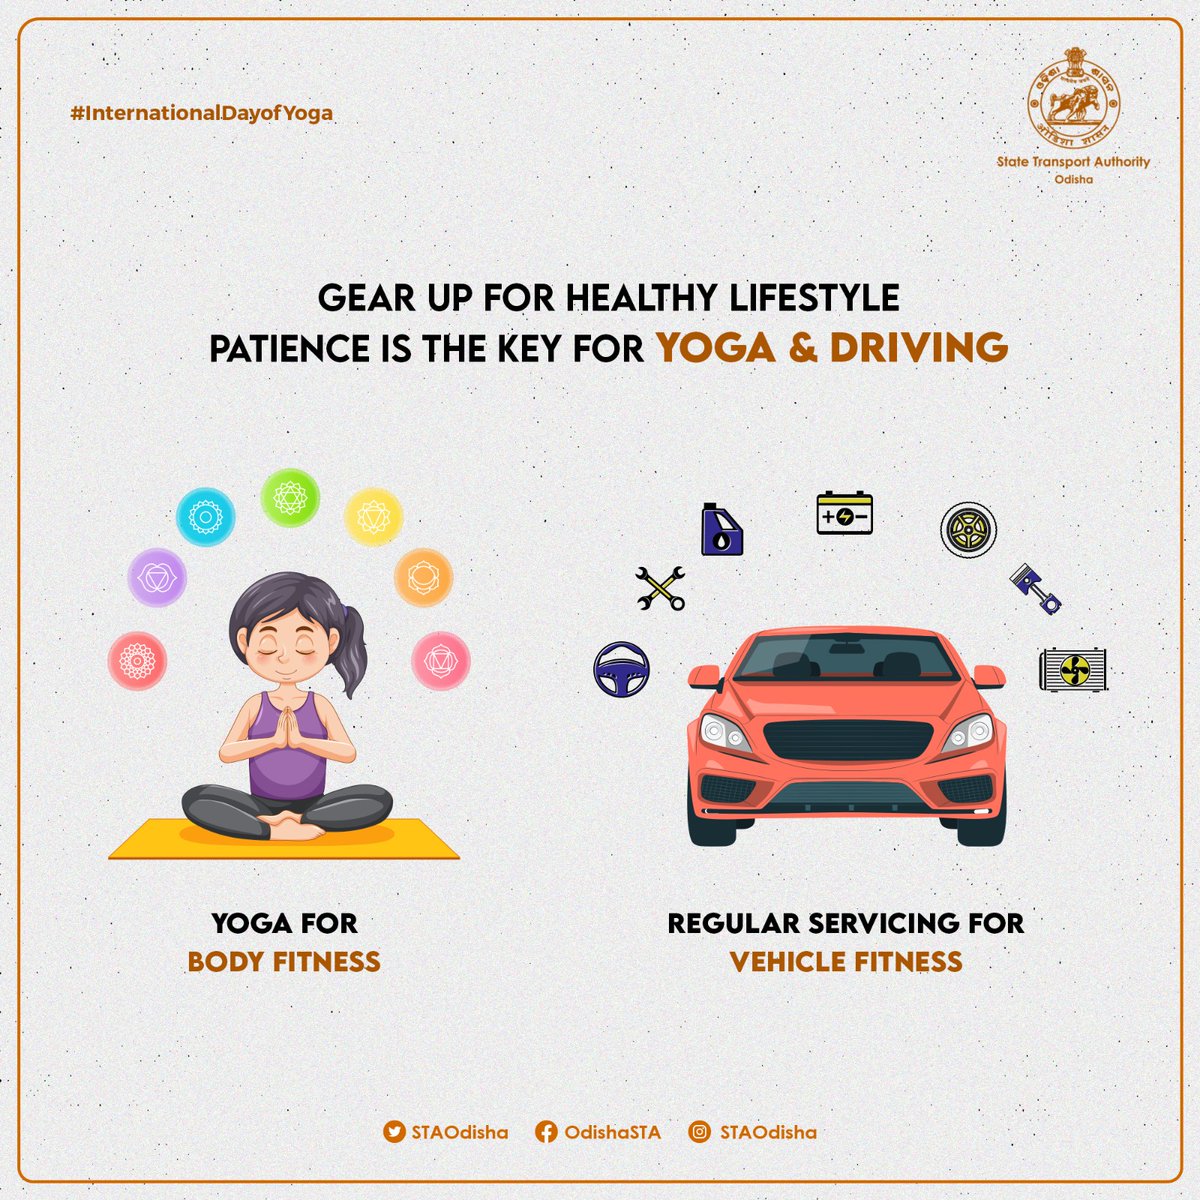 Regular yoga keeps the body fit. Regular servicing keeps the vehicle fit. Gear up for healthy lifestyle! #RoadSafety #YogaDay #InternationalDayofYoga #internationalyogaday23